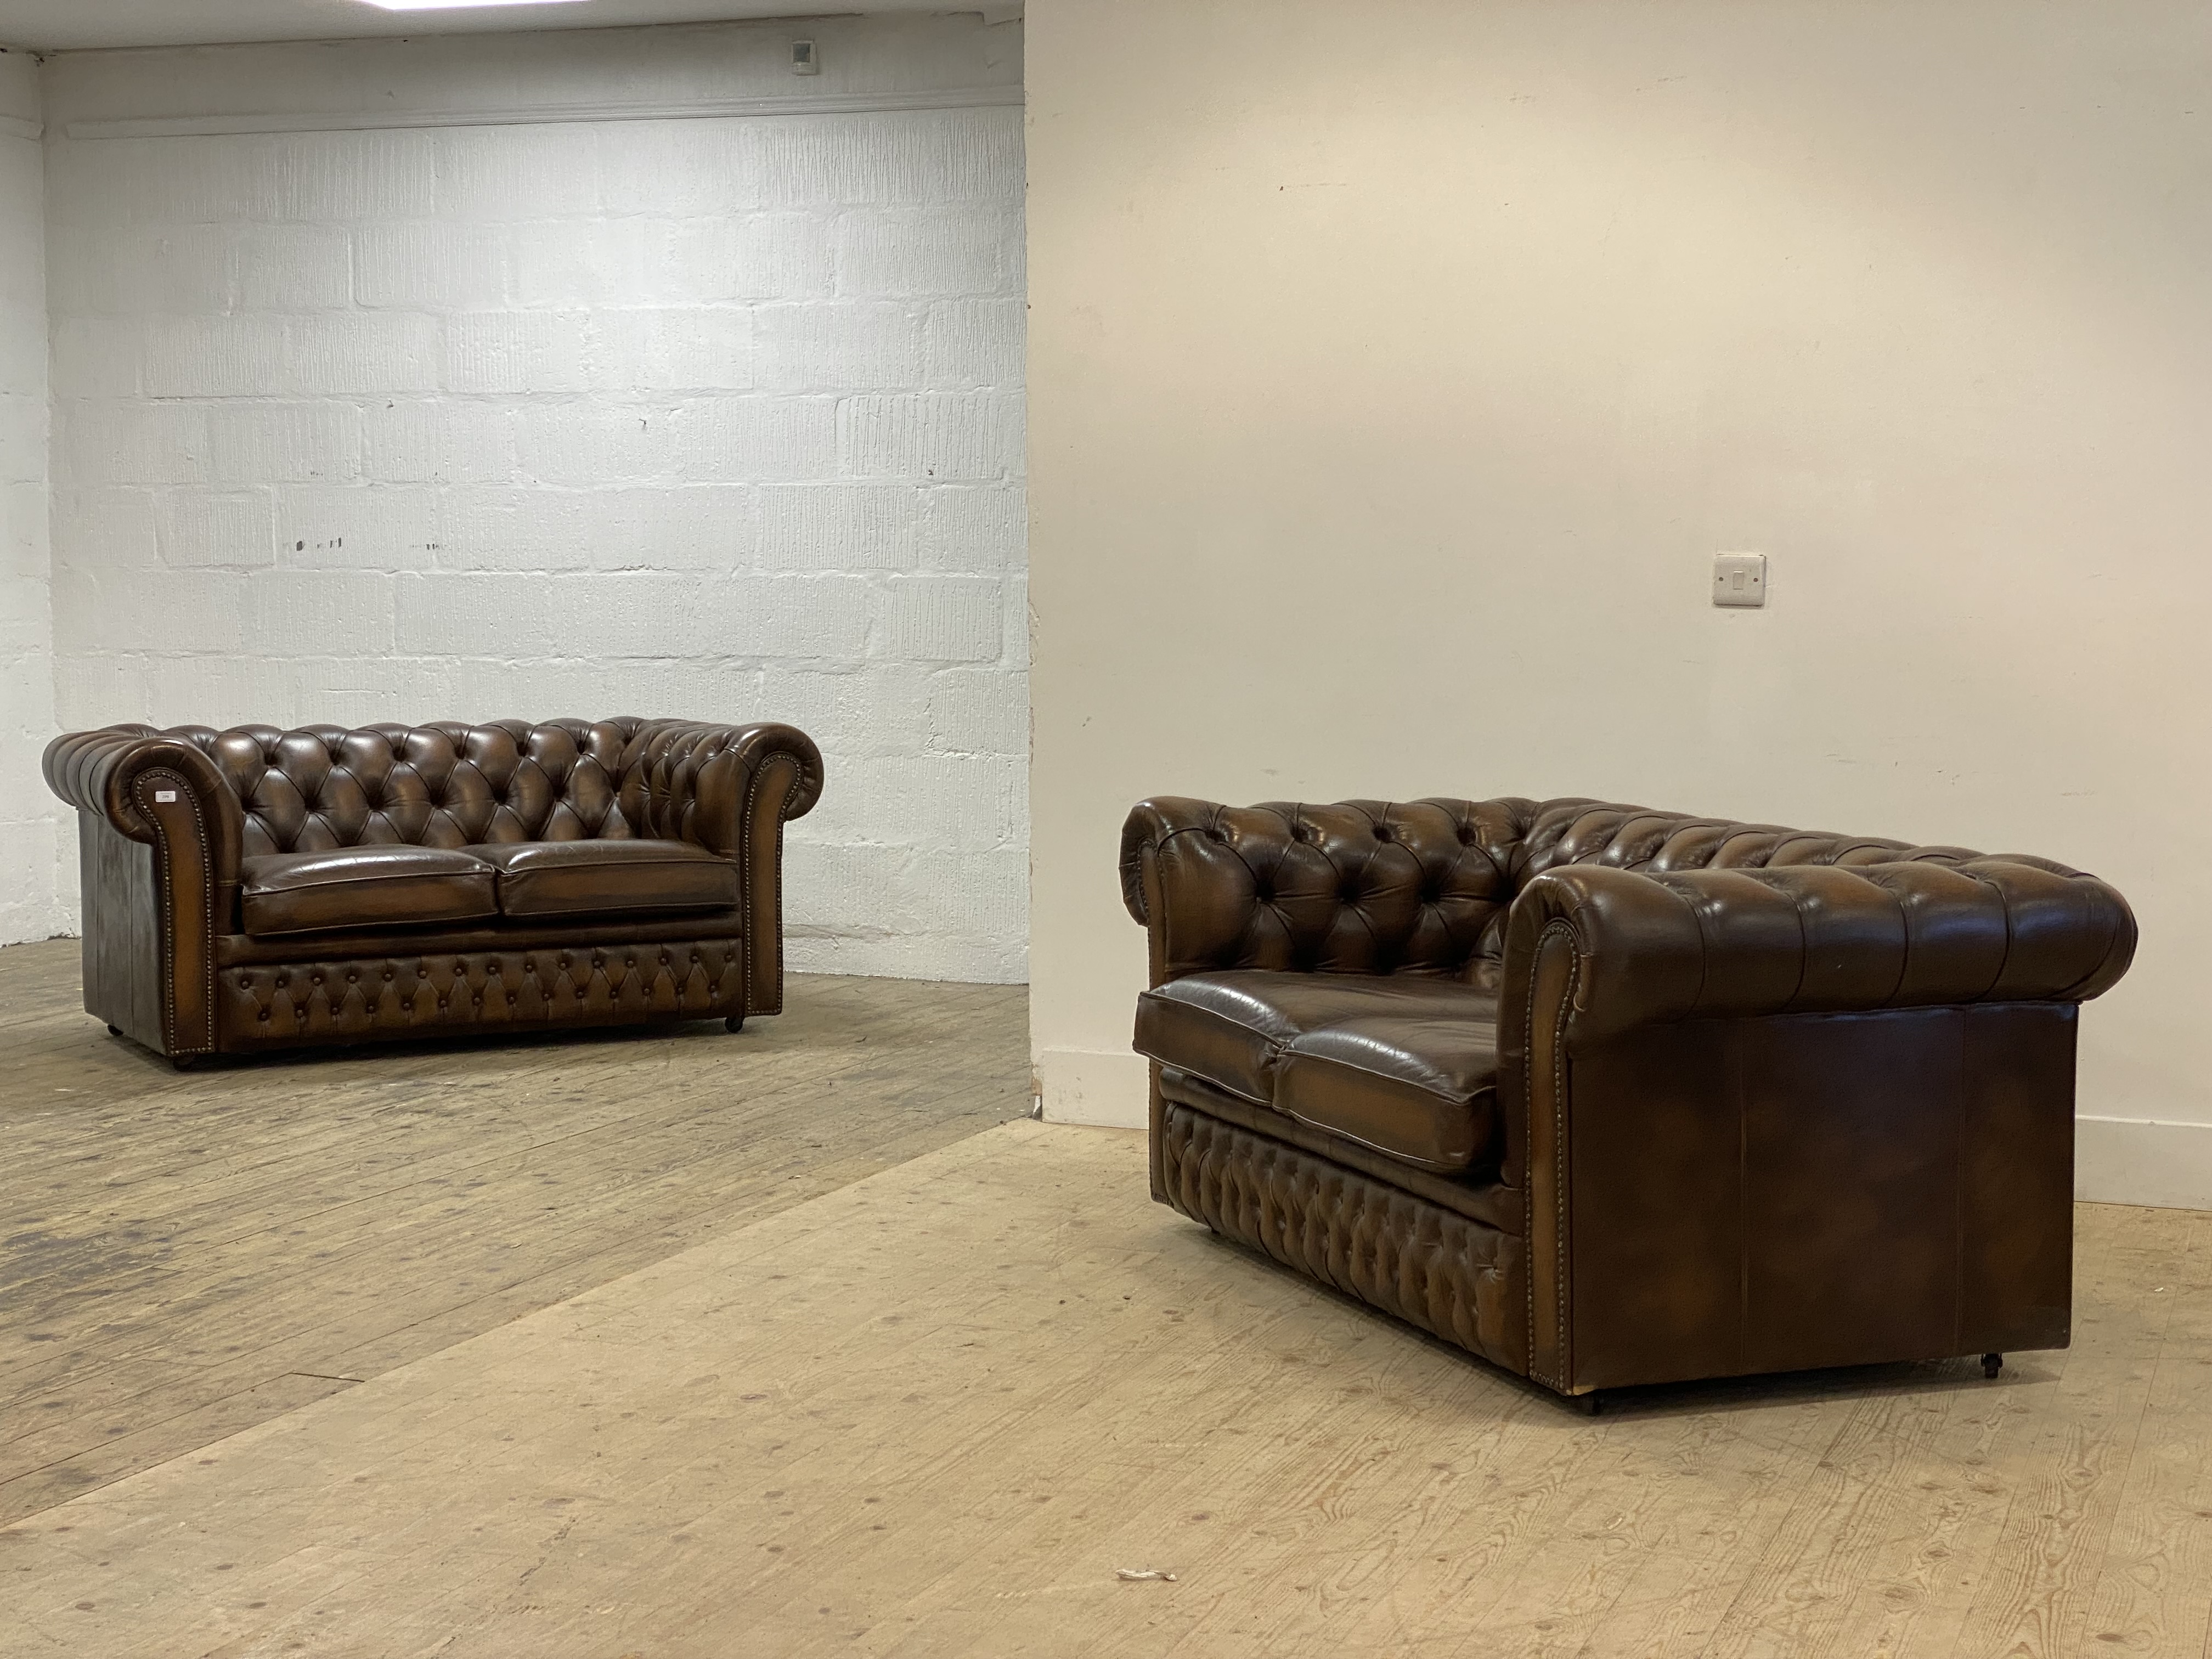 A pair of Vintage Chesterfield sofas, each upholstered in deep buttoned brown leather, moving on